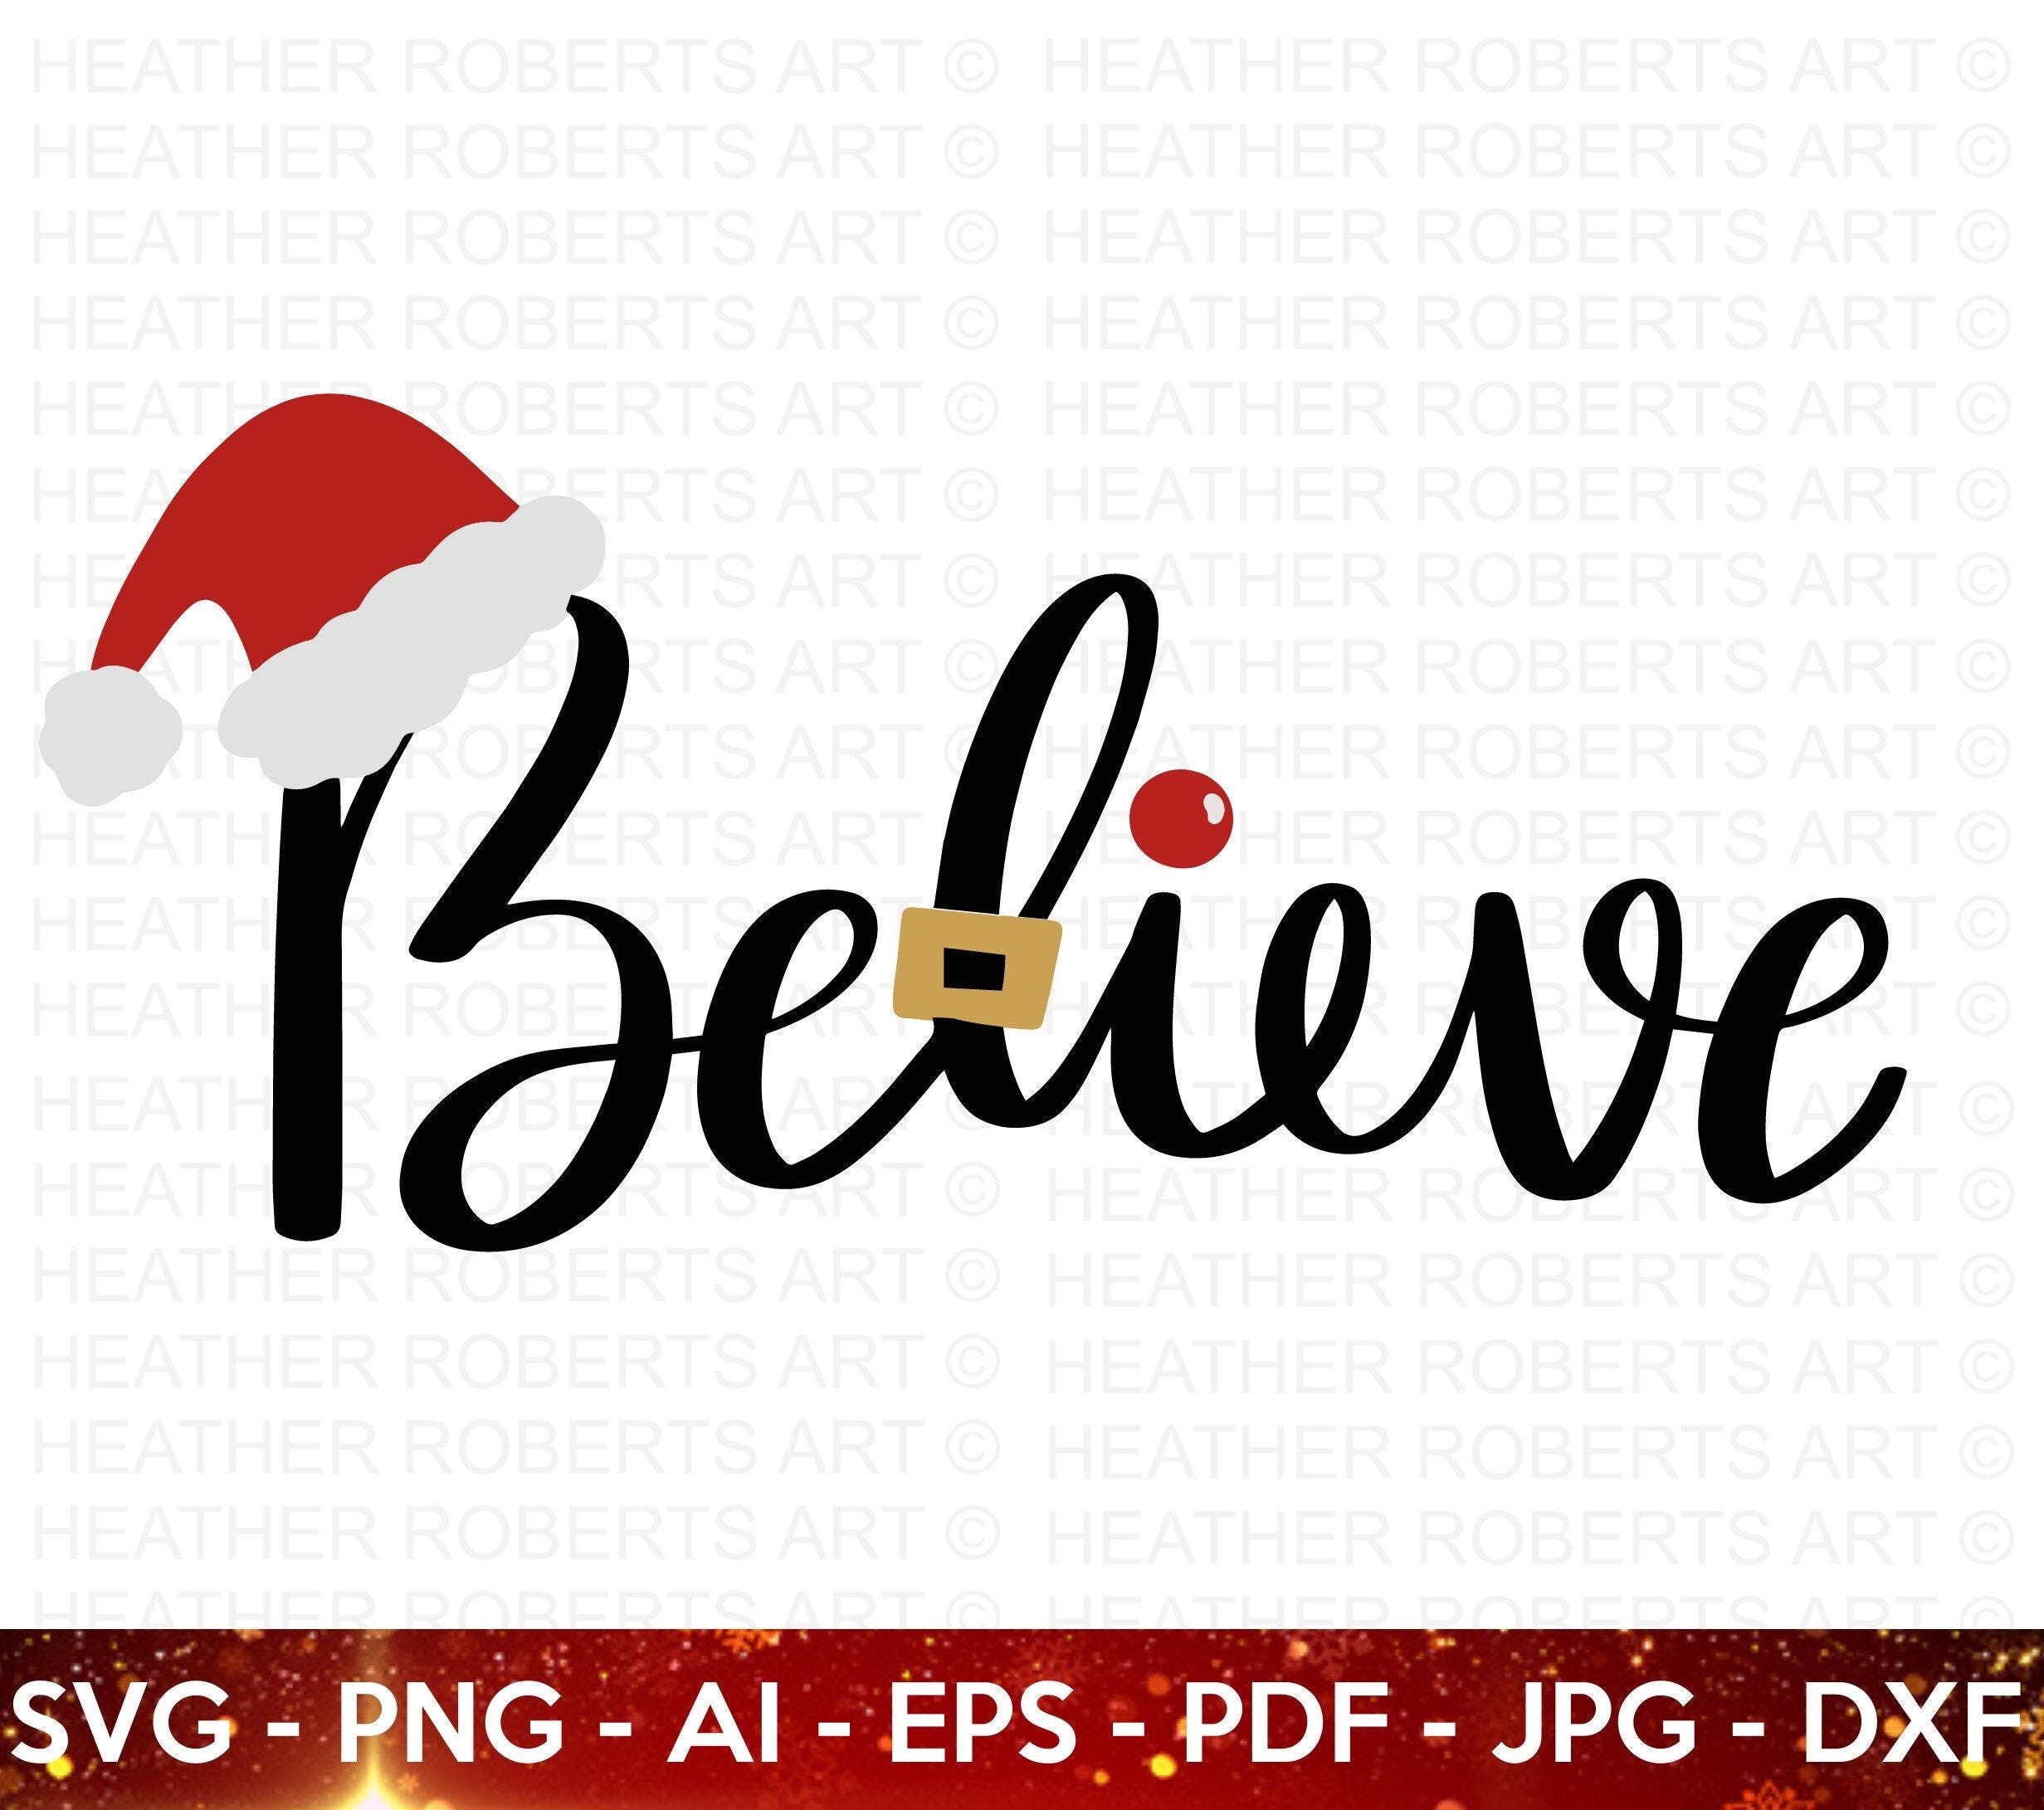 Believe SVG, Christmas Family Shirts SVG, Christmas Sign svg, Winter svg, Christmas svg, Hand-lettered svg, Cut File for Cricut, Silhouette